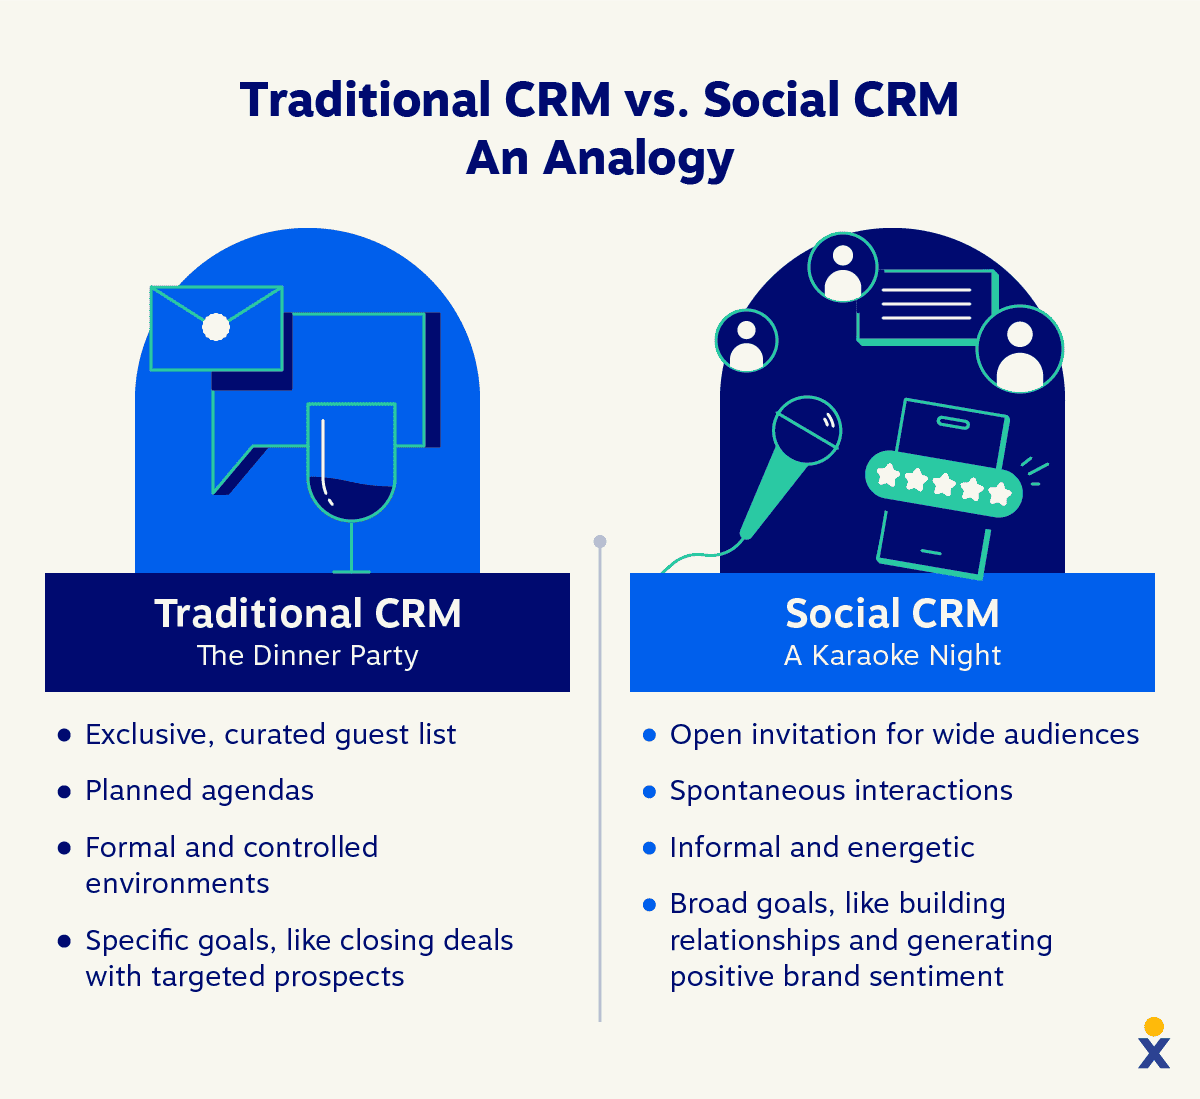 An image shows an analogy between traditional and social CRM.